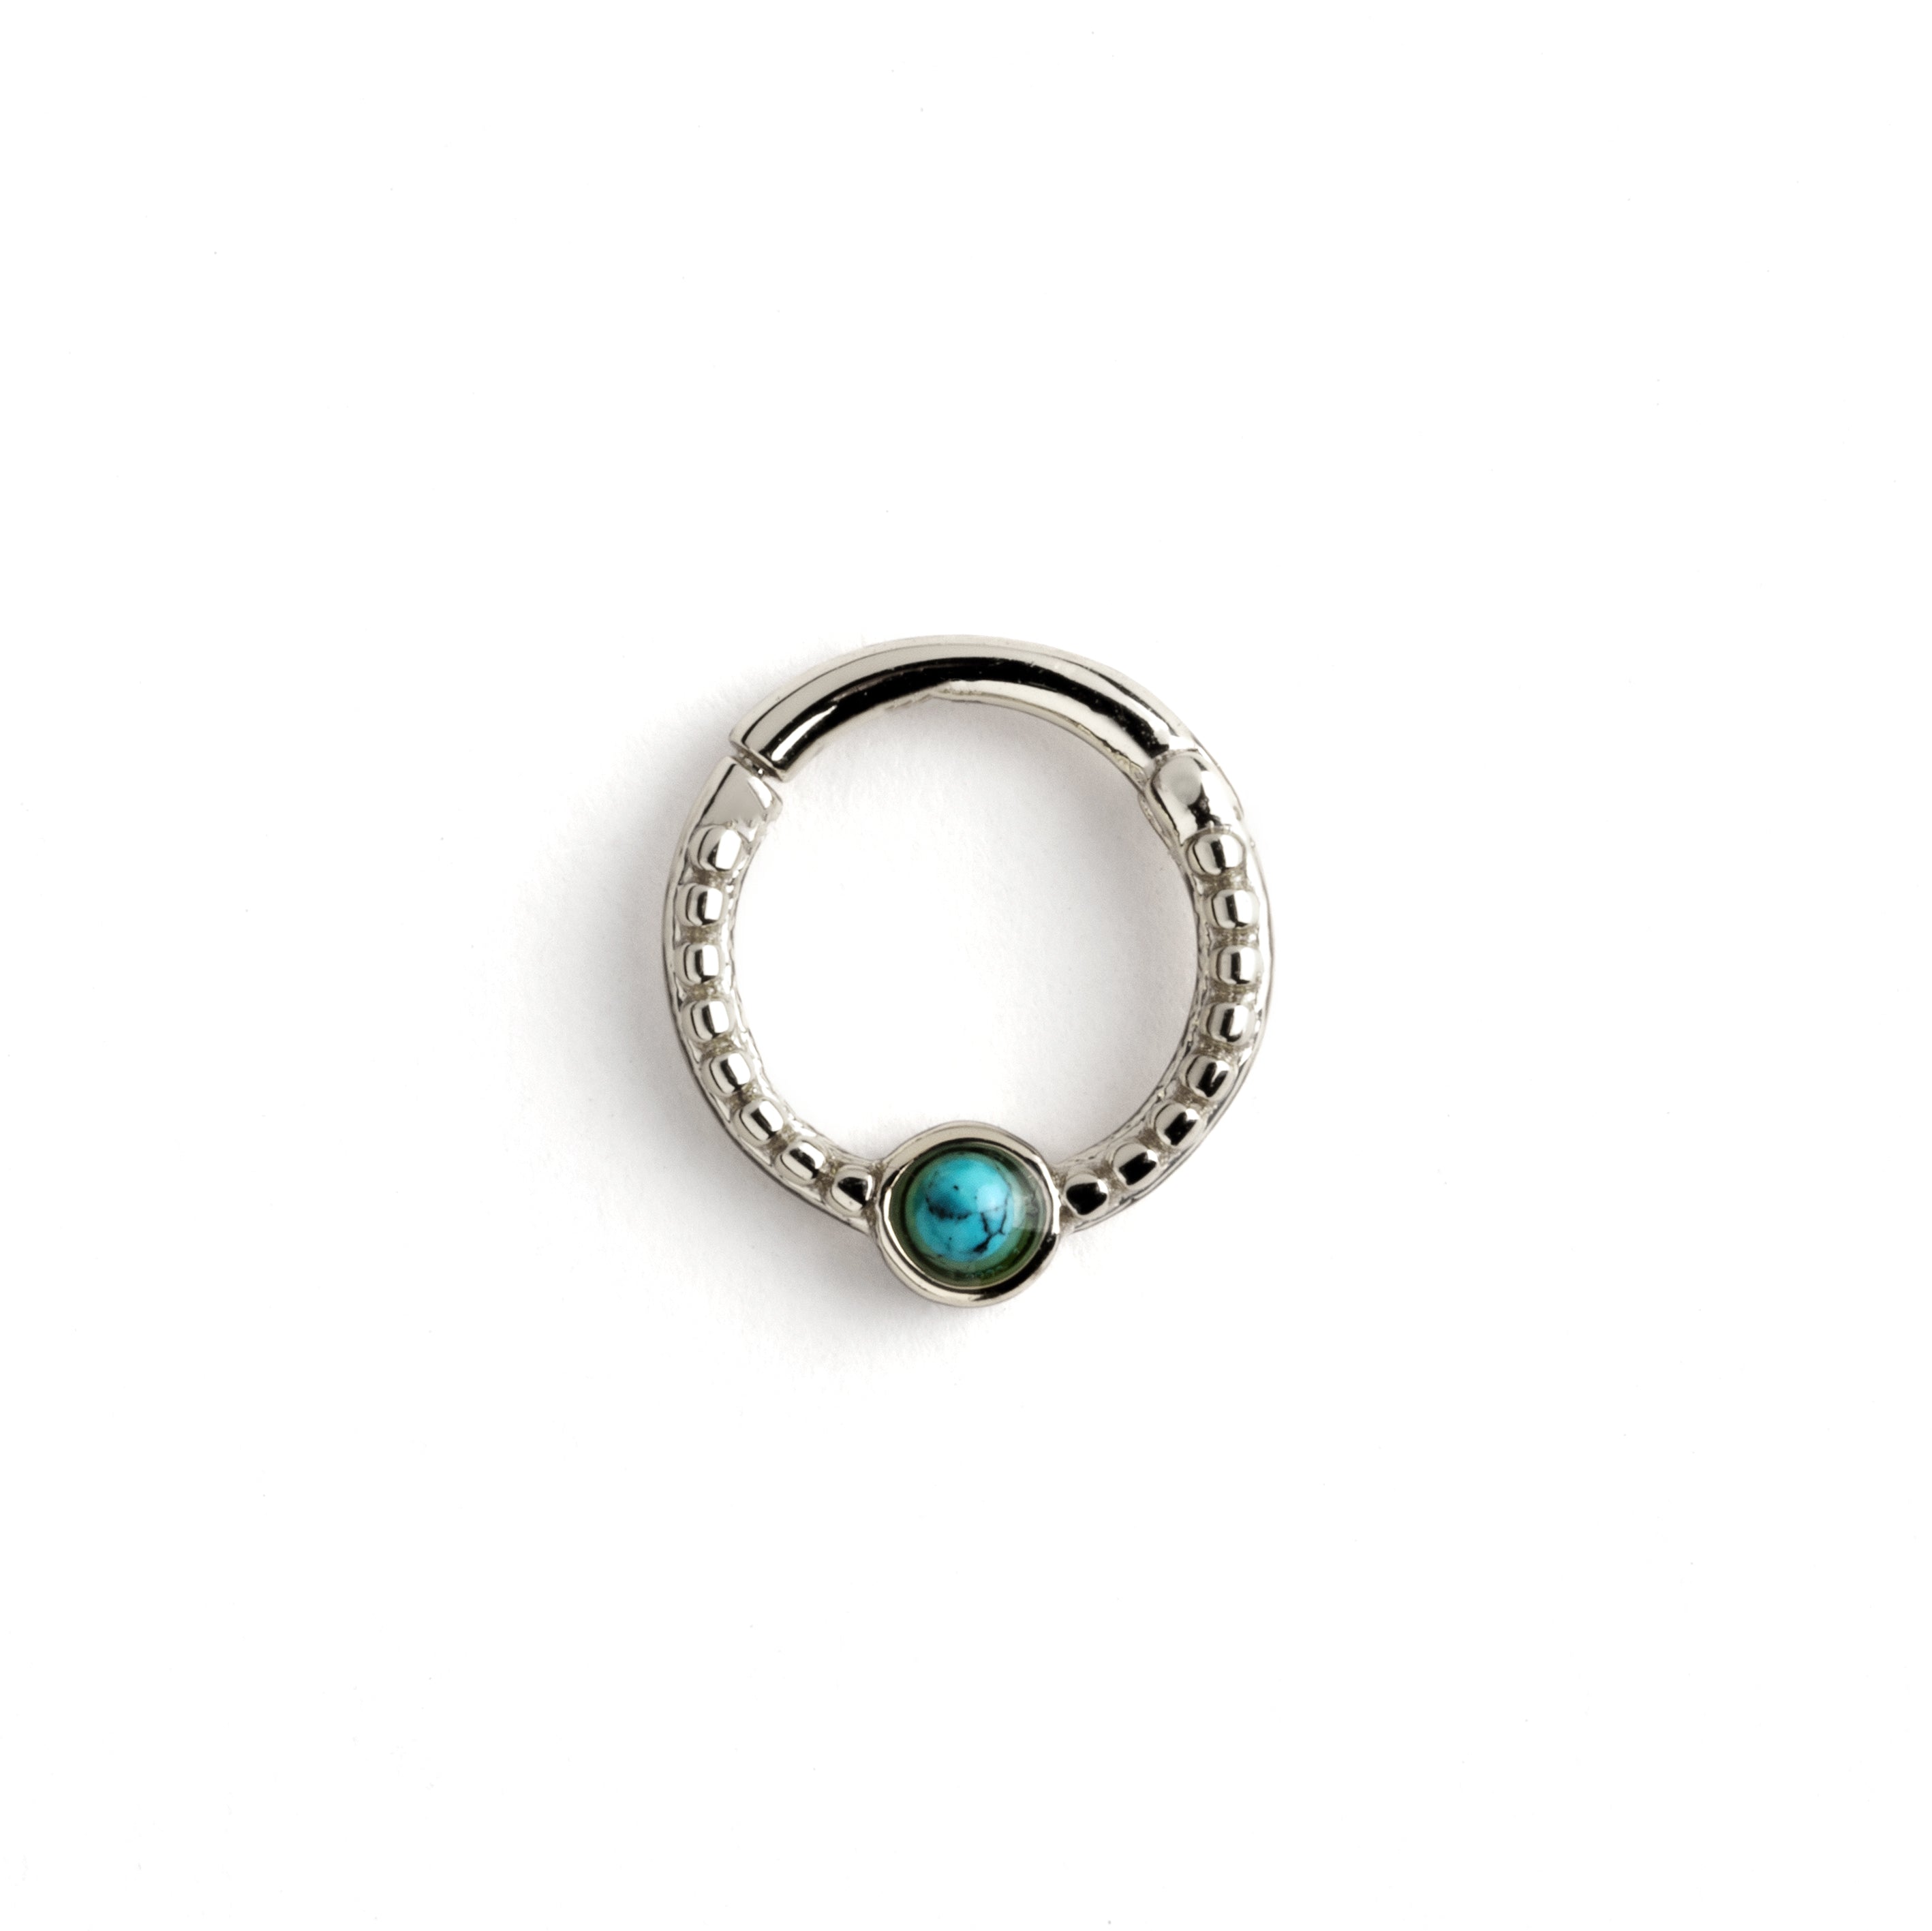 Dayaa surgical steel septum clicker with turquoise frontal view 